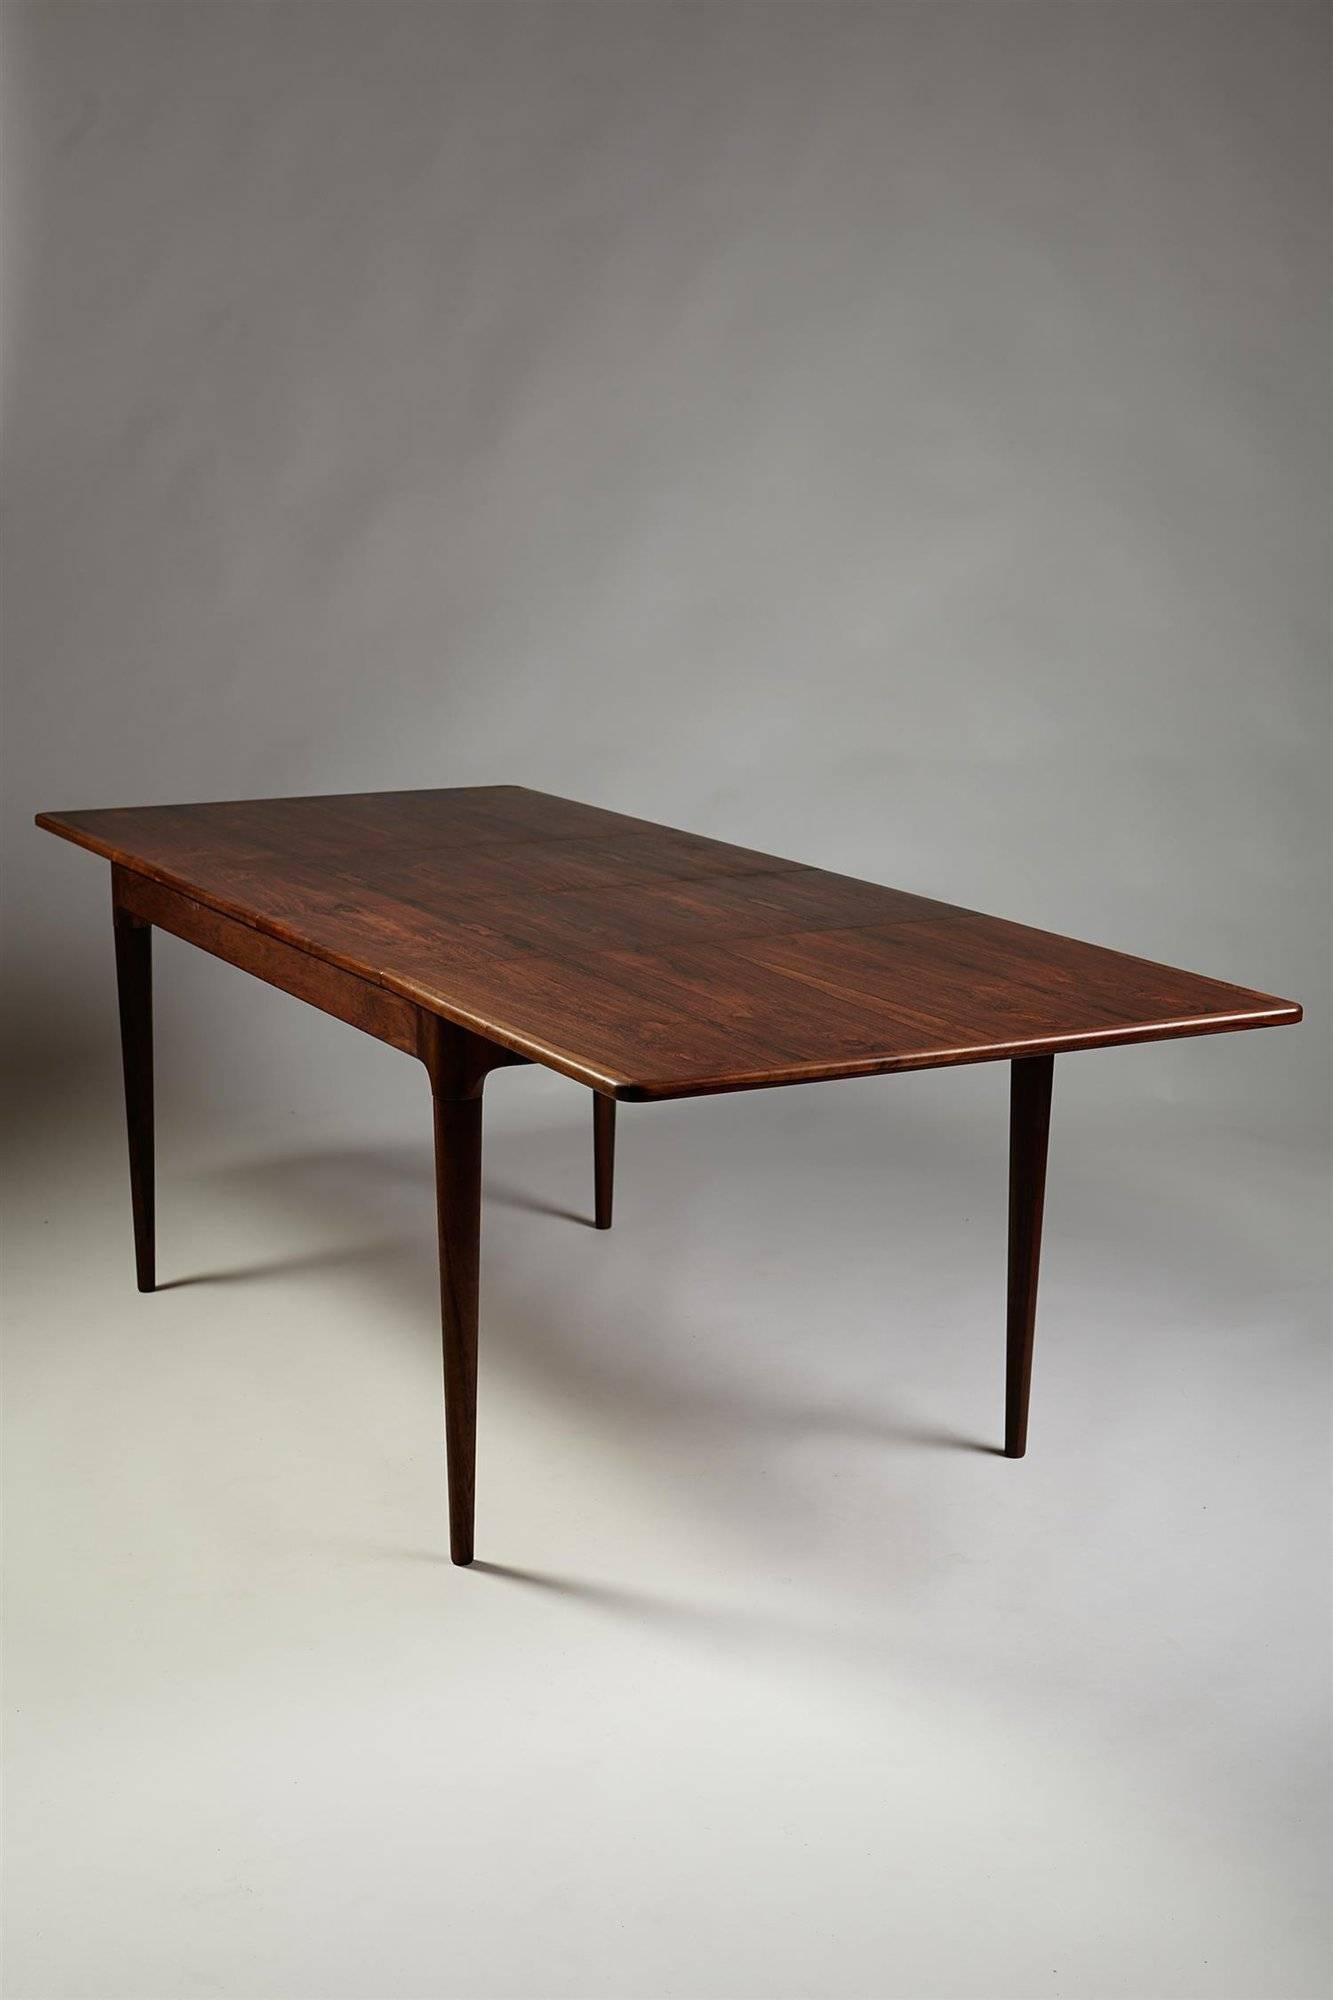 Dining table, designed by Mogens Kold, Denmark. 1960’s.

Brazilian rosewood.

Measurements:
Height: 73 cm/ 28 3/4''
Length when closed: 135 cm/ 53''.
Two extension leaves at 45 cm/ 17 3/4'' each.
Width: 90 cm/ 35 1/2''